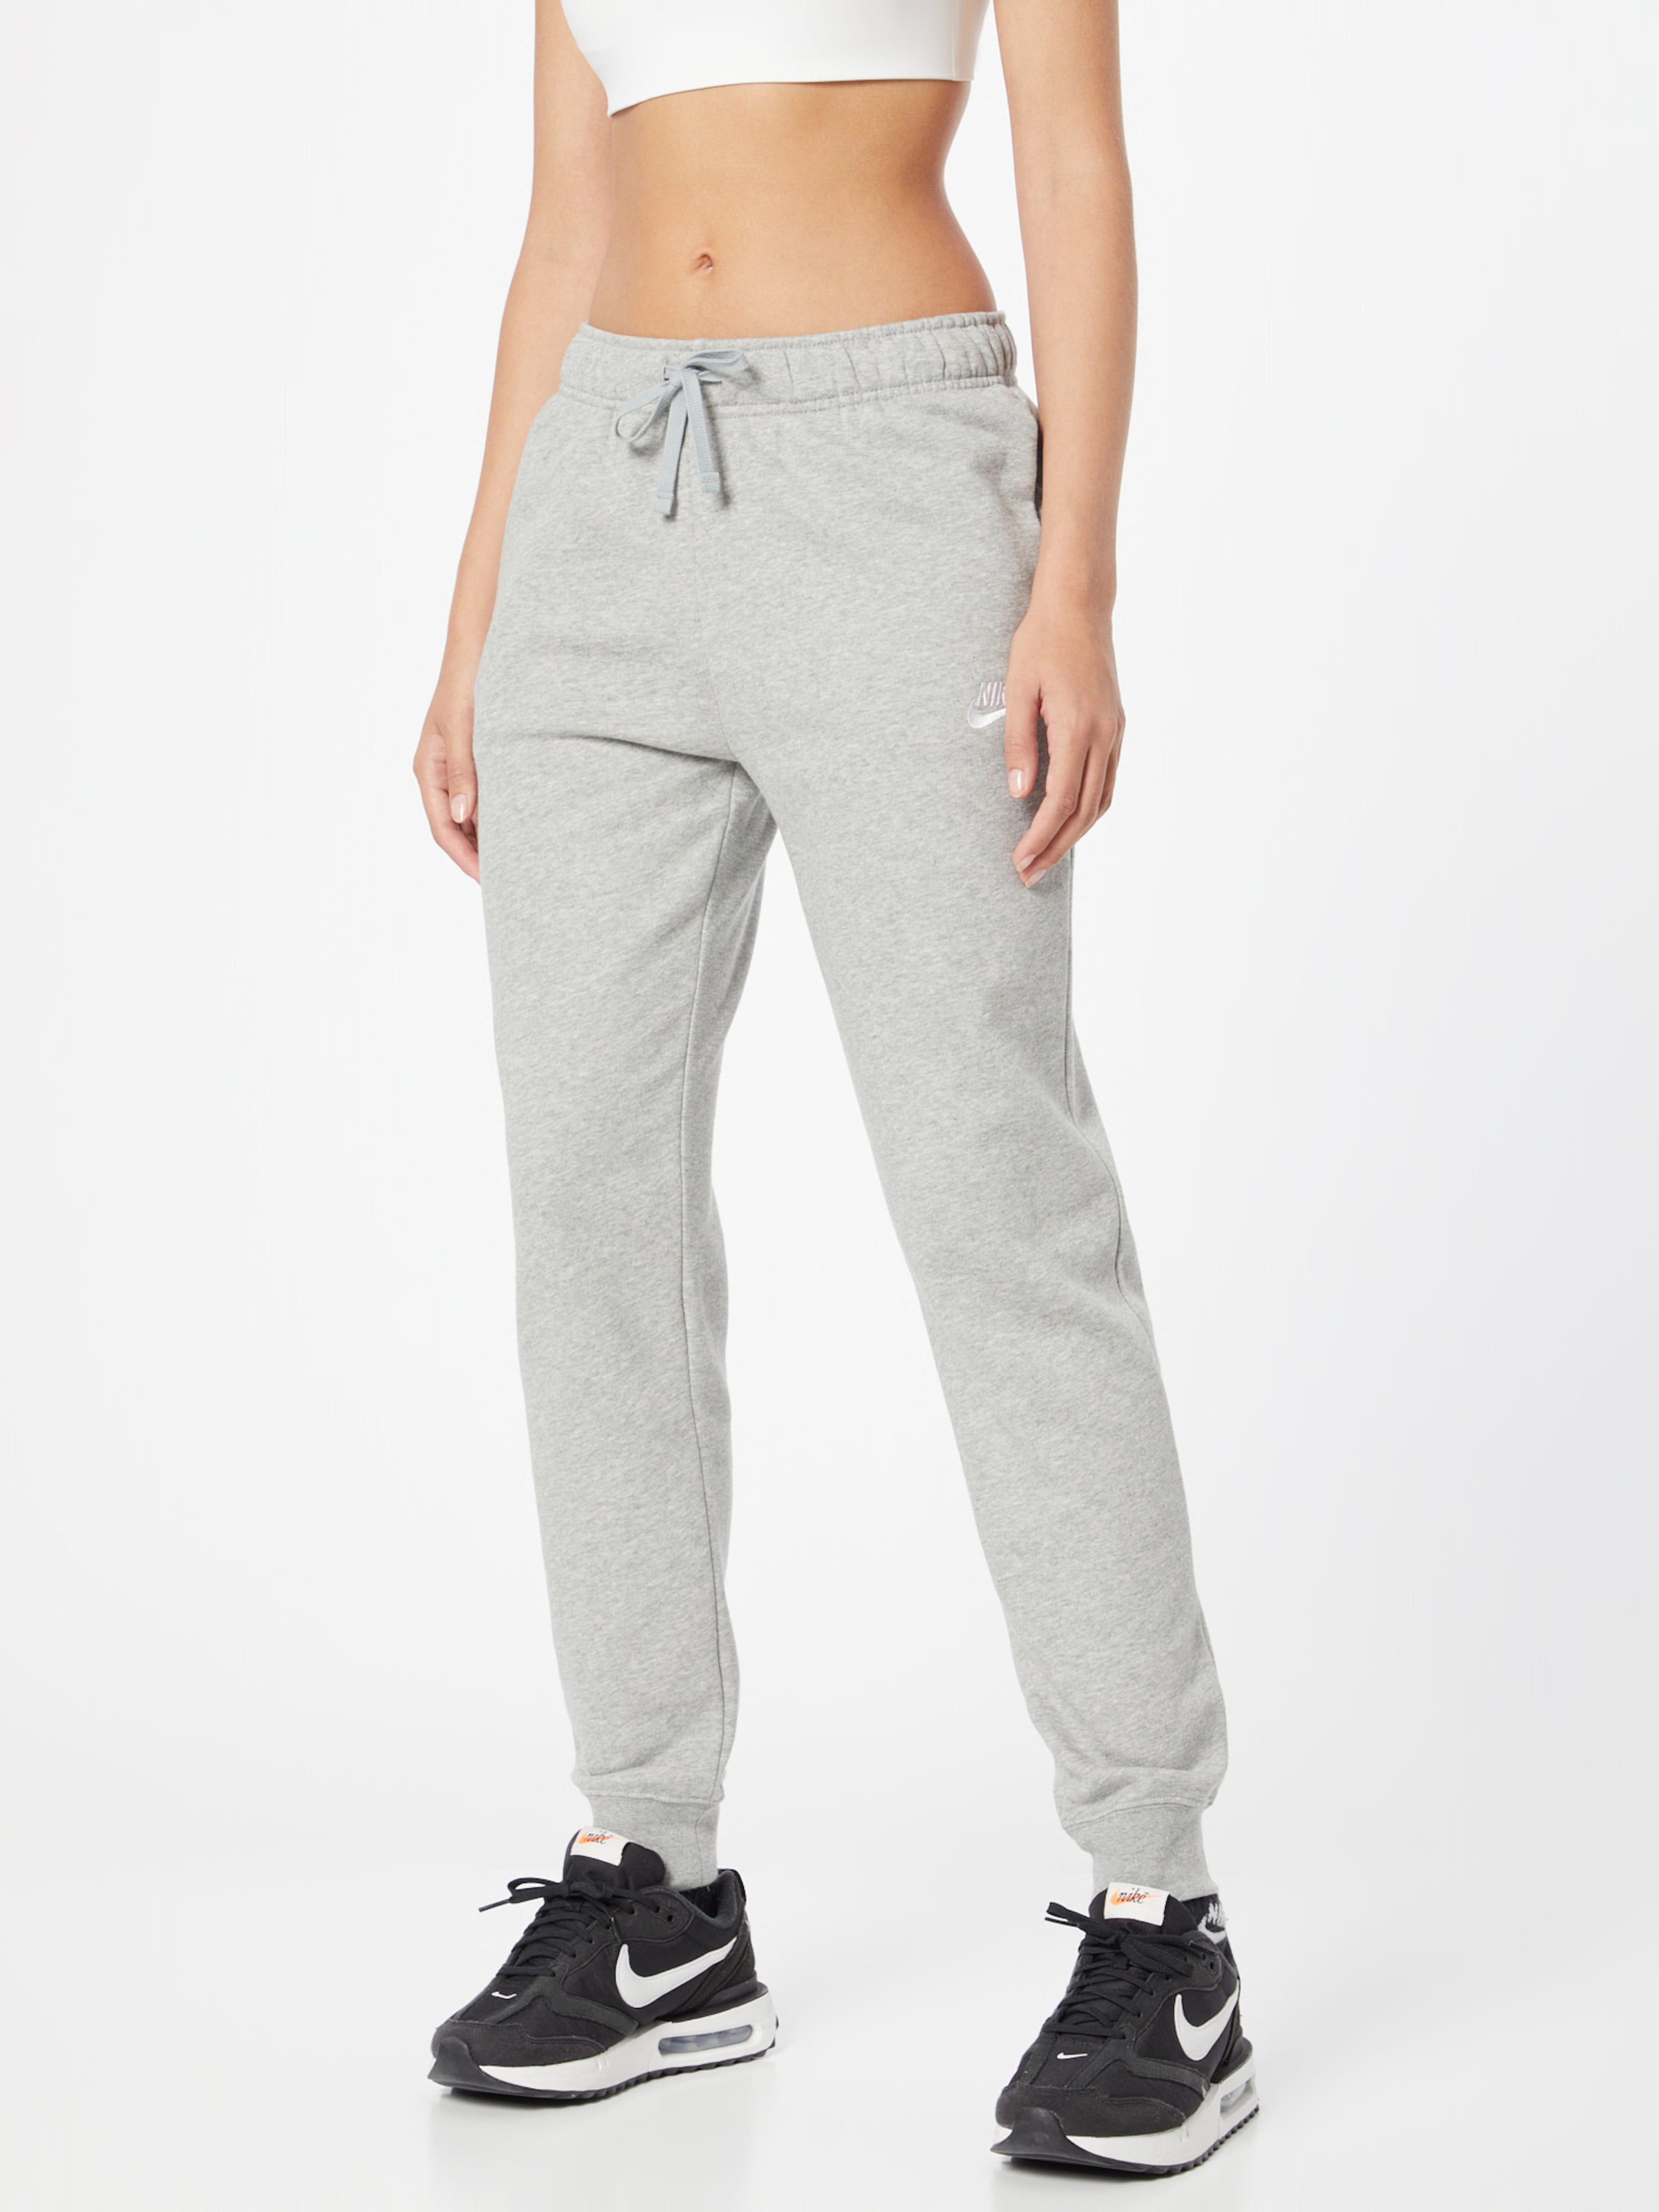 farvel renhed Manchuriet Nike Sportswear Tapered Bukser i Lysegrå | ABOUT YOU